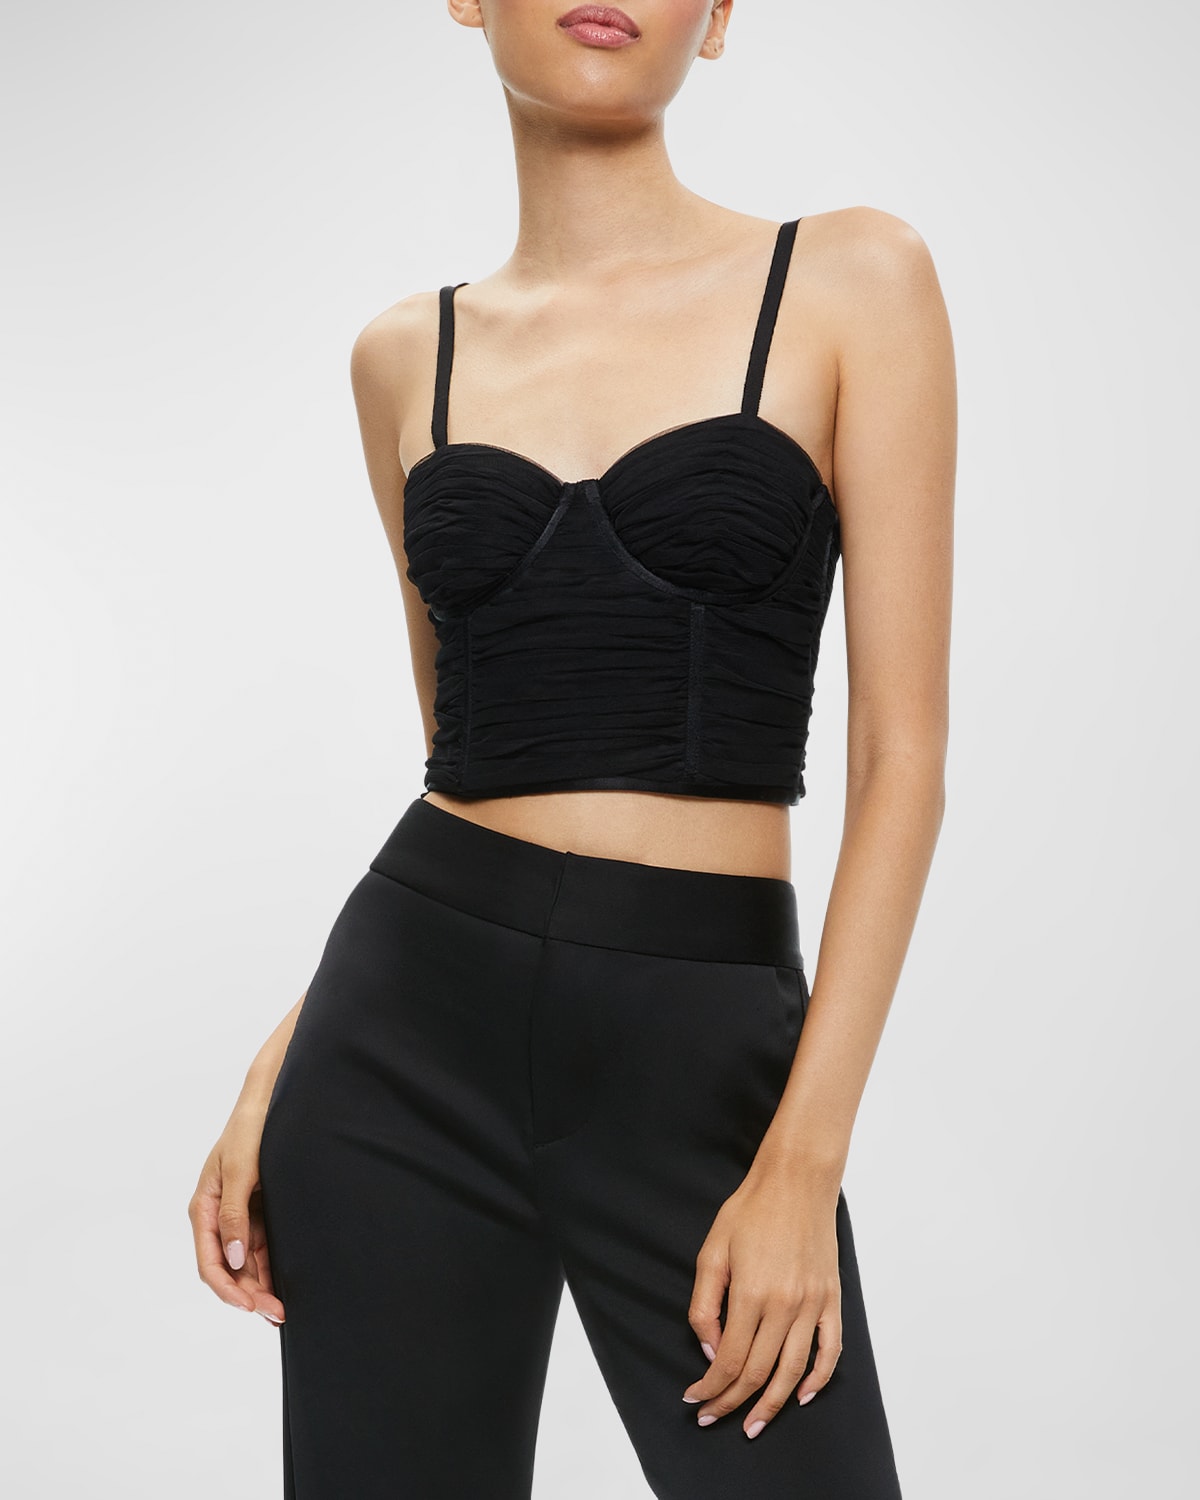 ALICE AND OLIVIA DAMIA RUCHED BUSTIER TOP